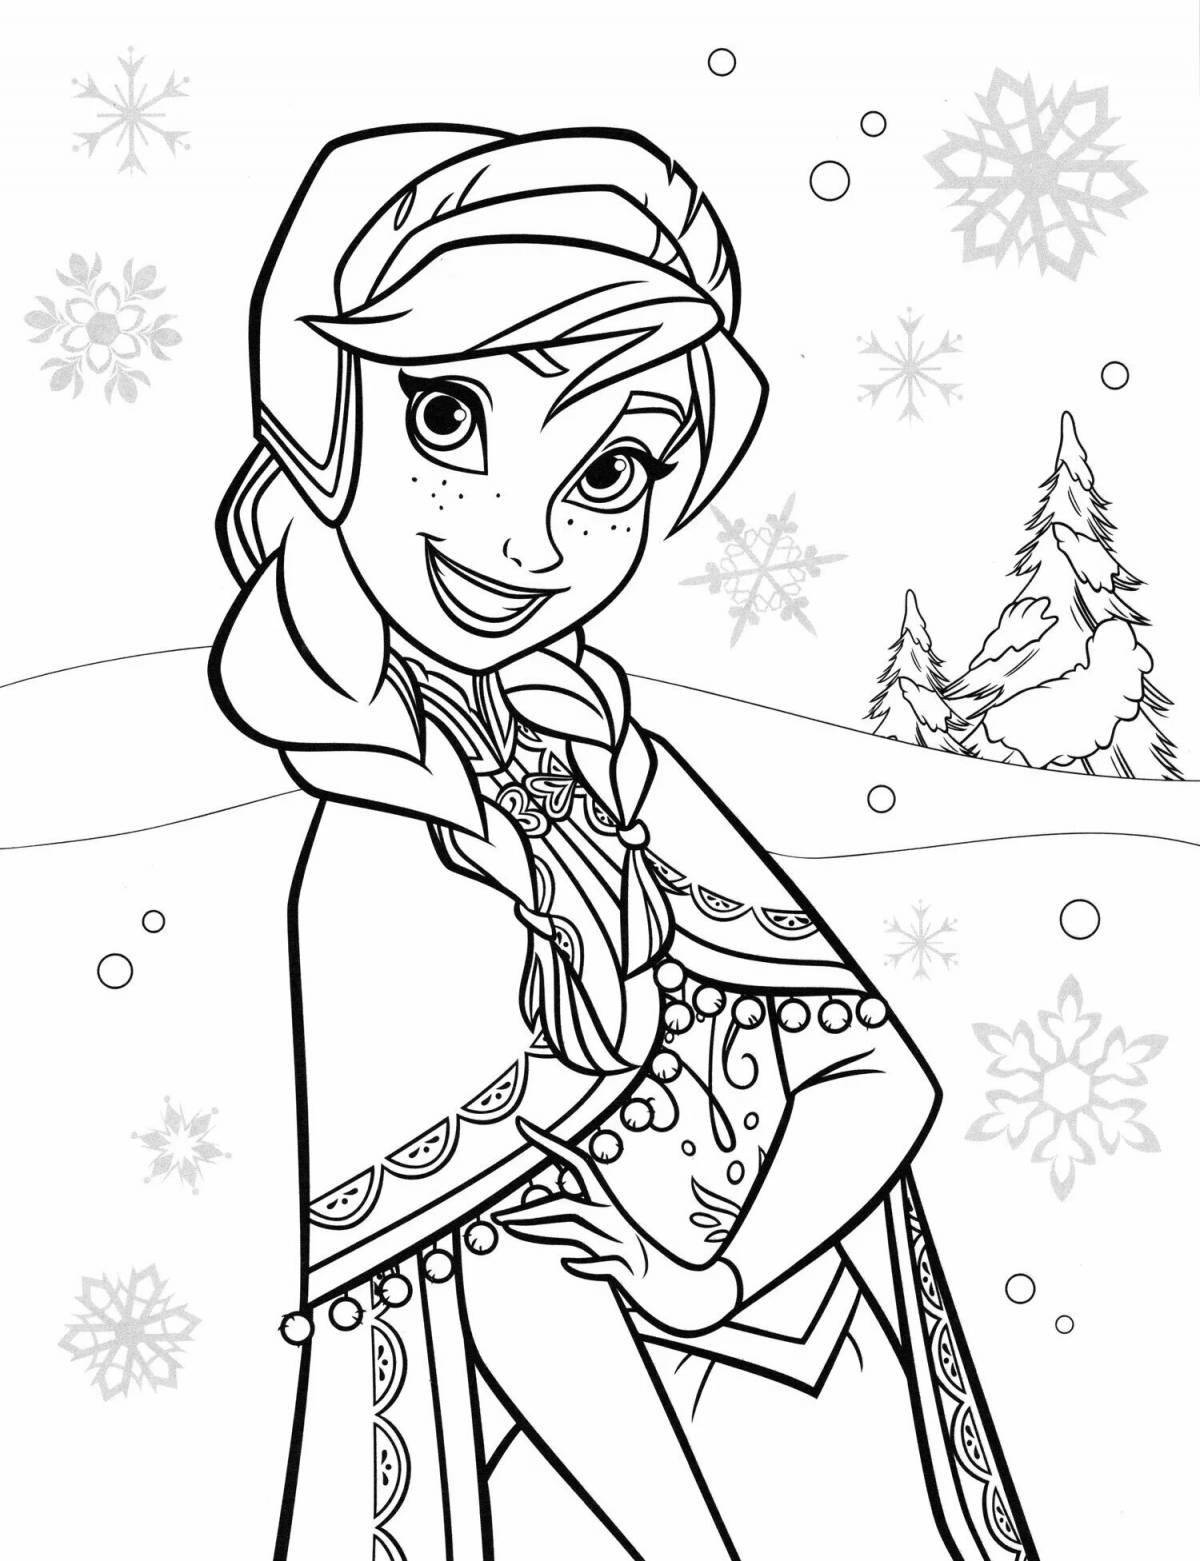 Anna's amazing coloring book for kids